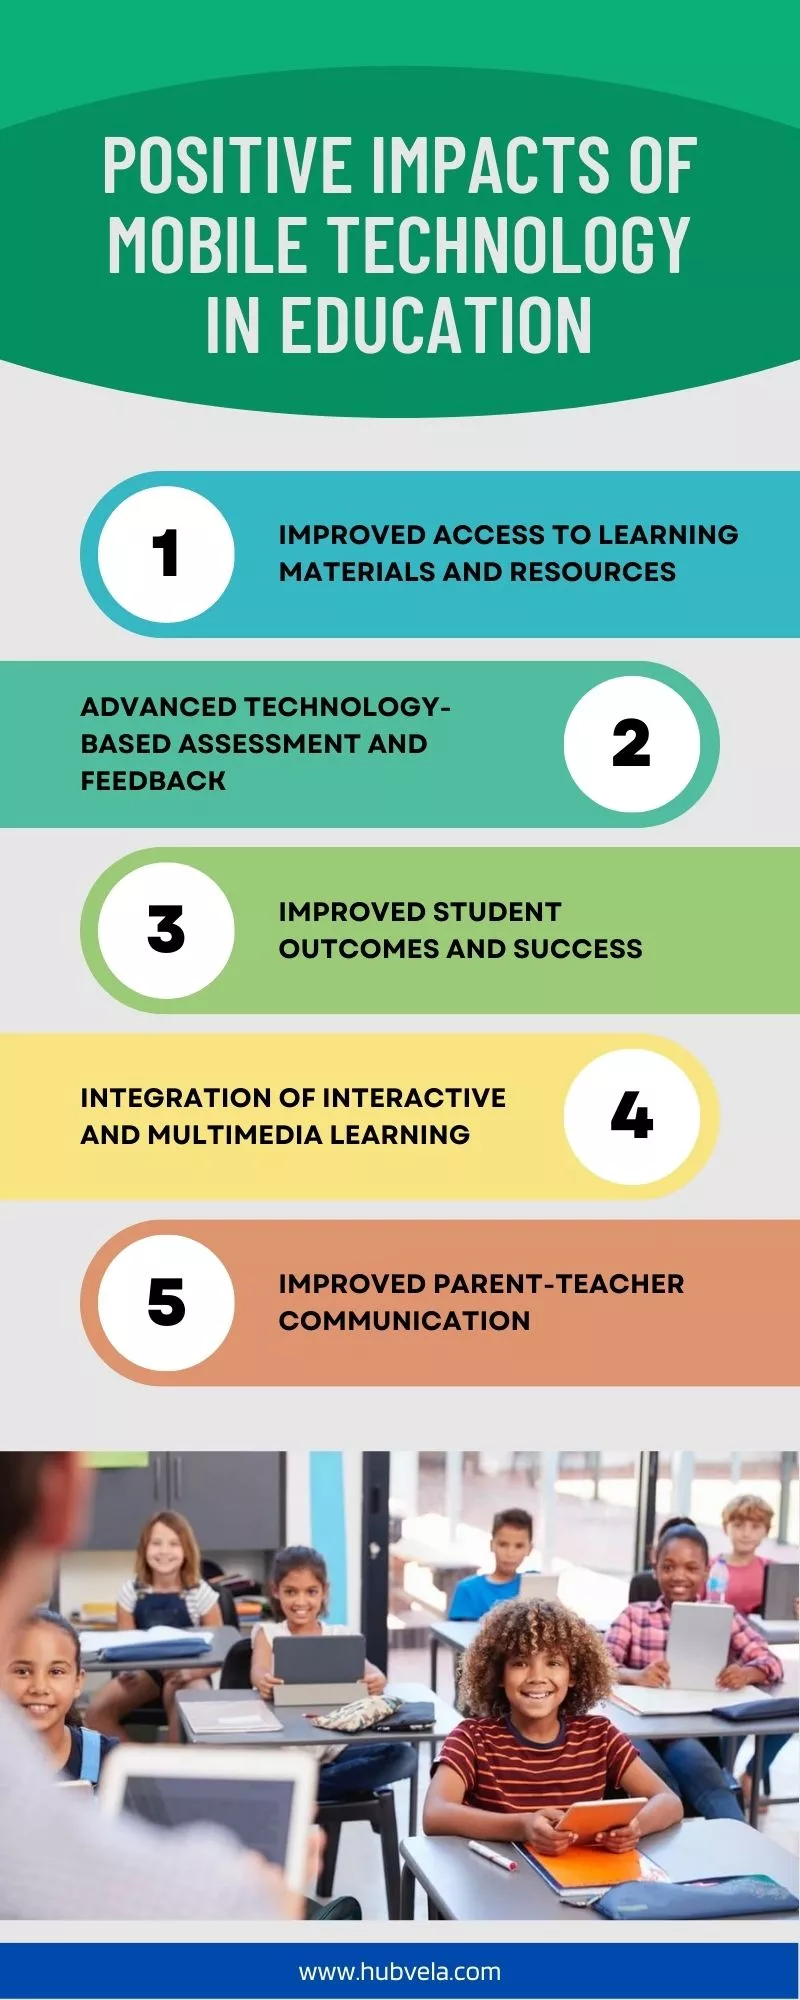 Positive Impacts of Mobile Technology in Education infographic